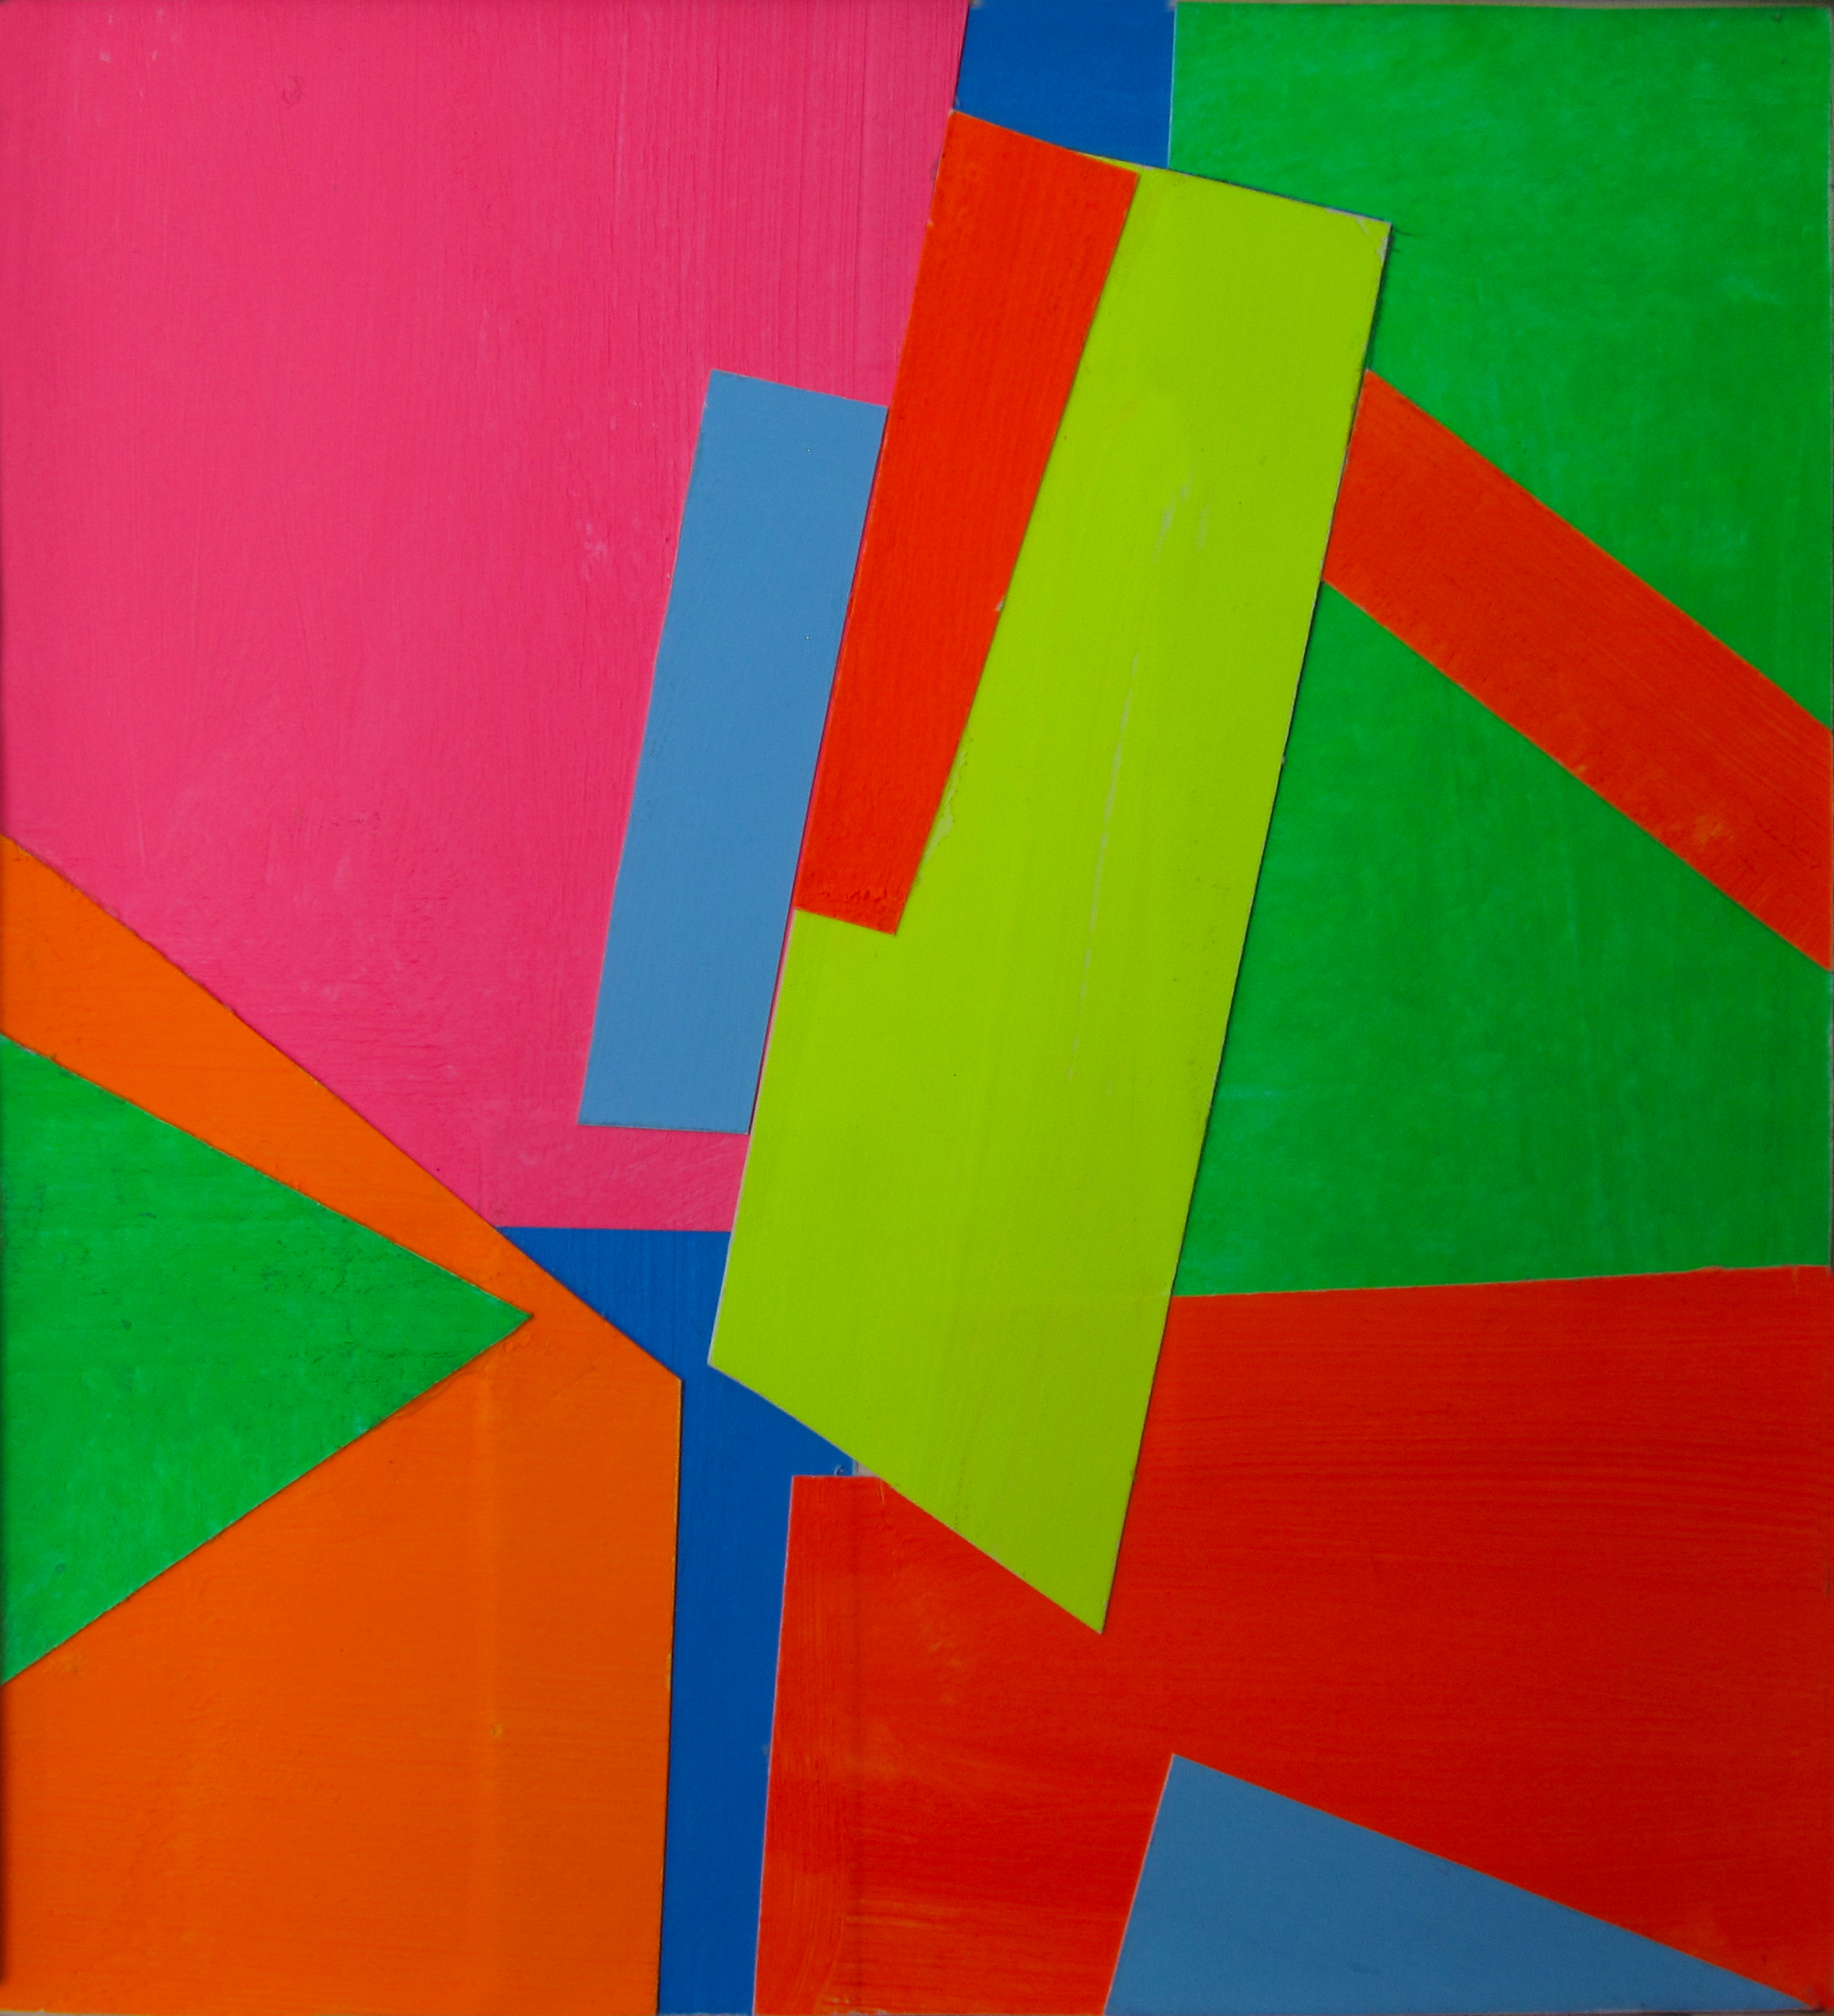    Cutout (pink, blue, yellow, green, red),   gouache lumi colors, 5 1/4 x 6 in, 2016 